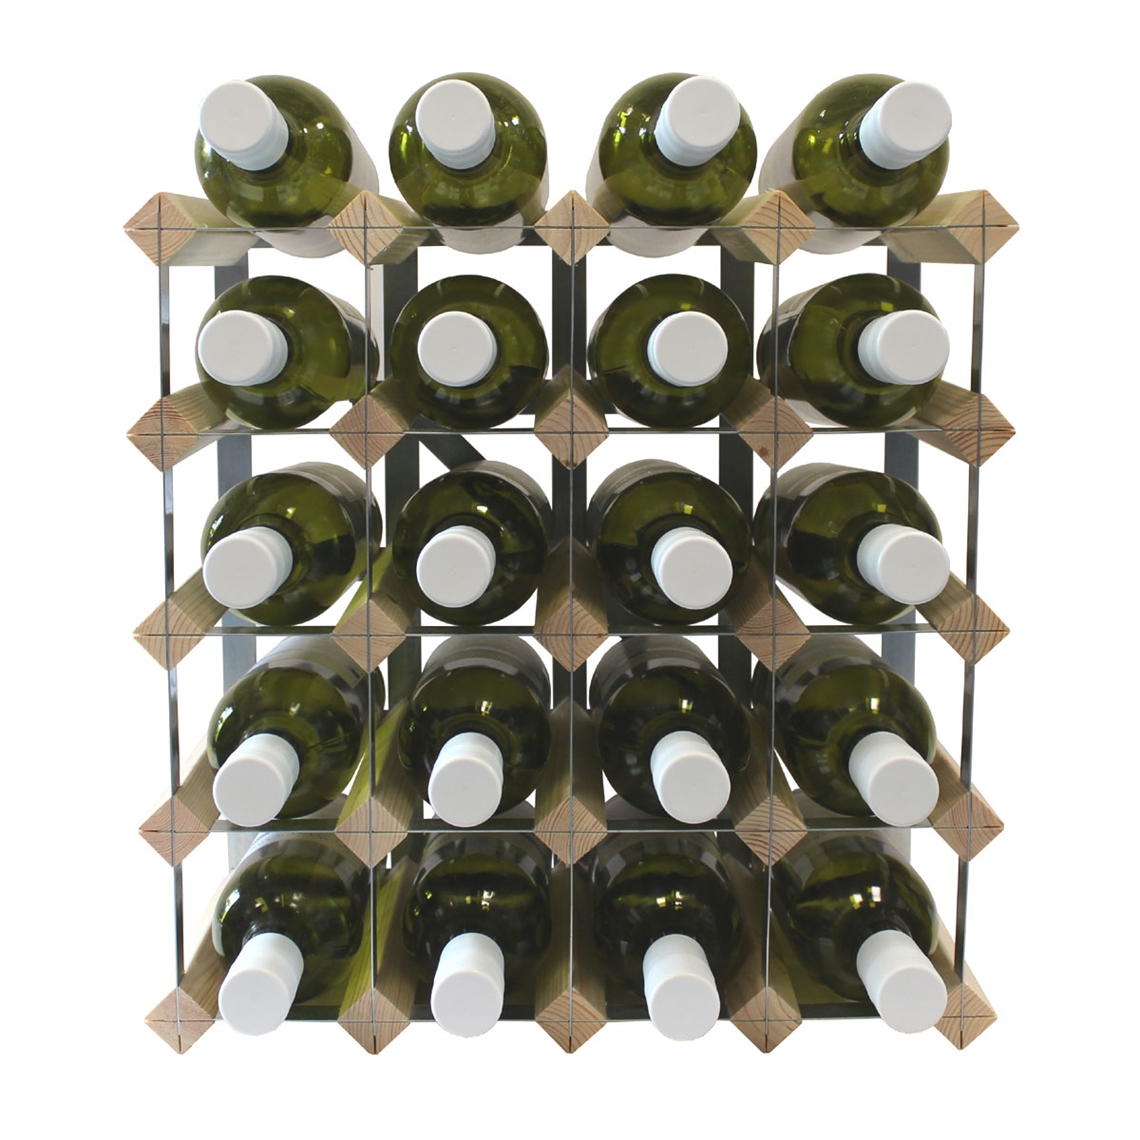 View more plastic wine racks from our Assembled Wine Racks range